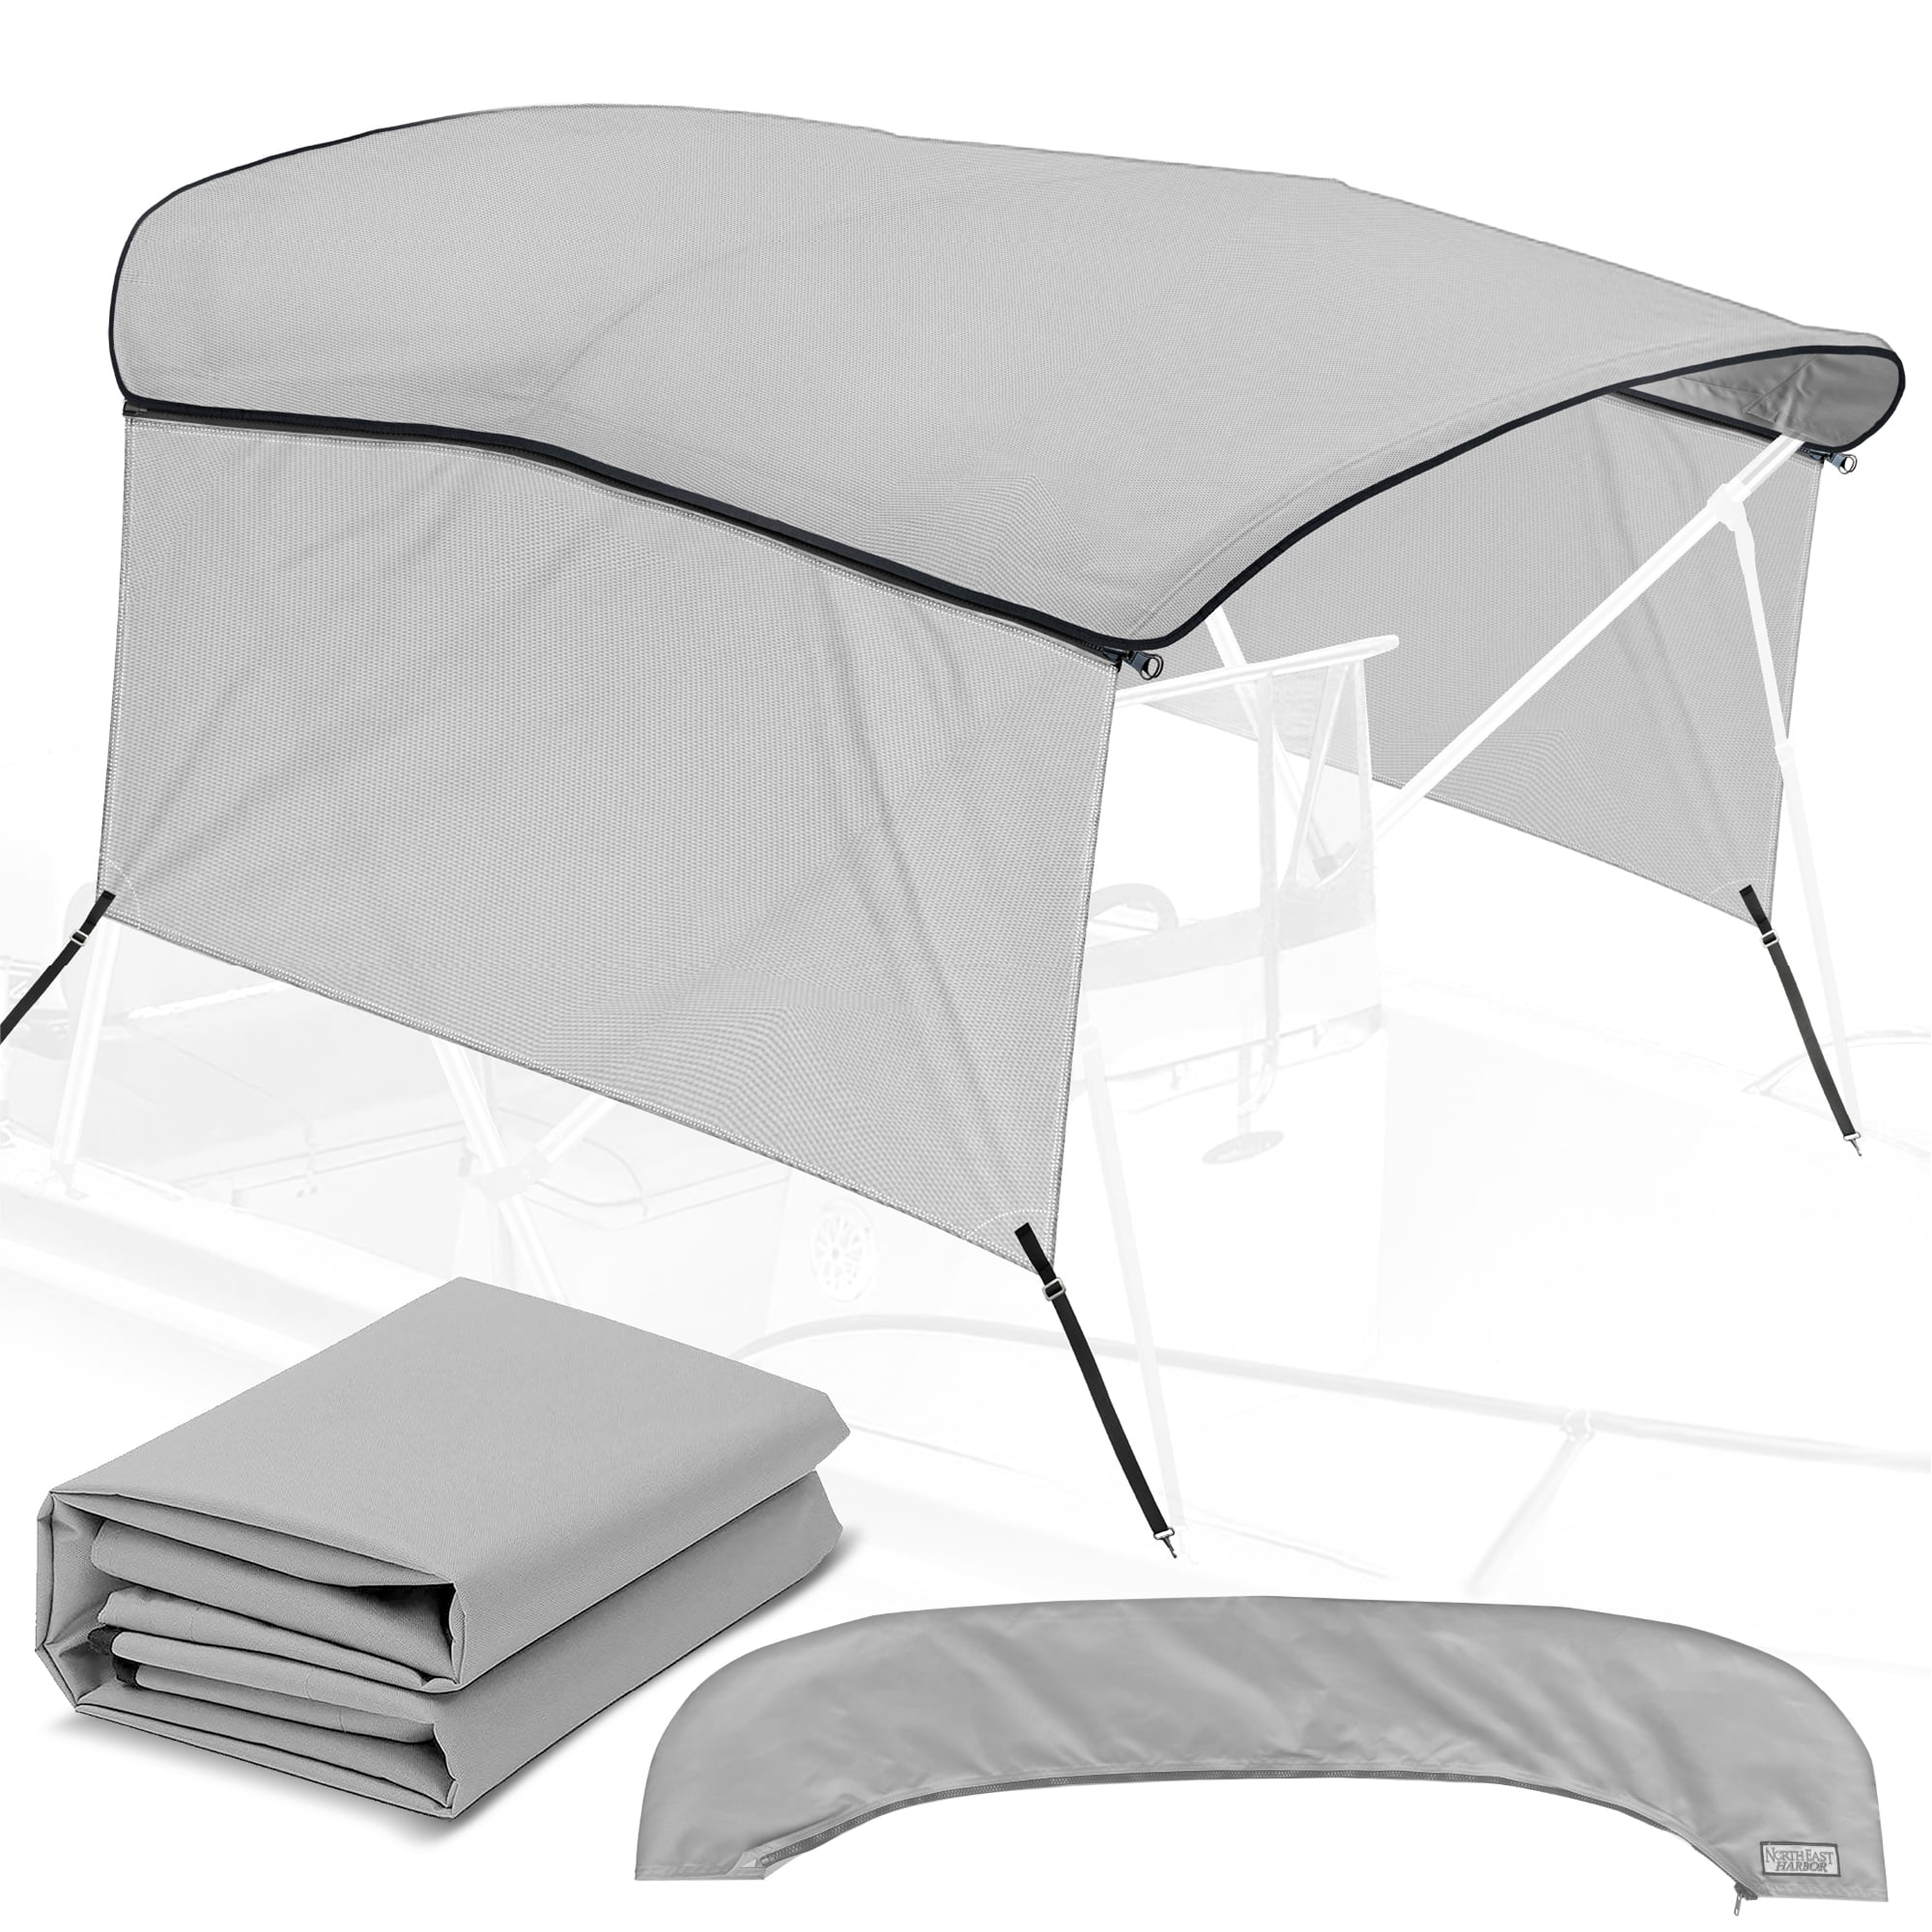 KNOX 4-Bow Bimini Top Universal Replacement Canvas Cover with Side Walls,  900D Marine Canopy, Storage Boot, Sun Shade Kit For Pontoon, V-Hull, Jon  Boat, Bimini Top Canvas ONLY (Sand) 8'L x 73-78W 